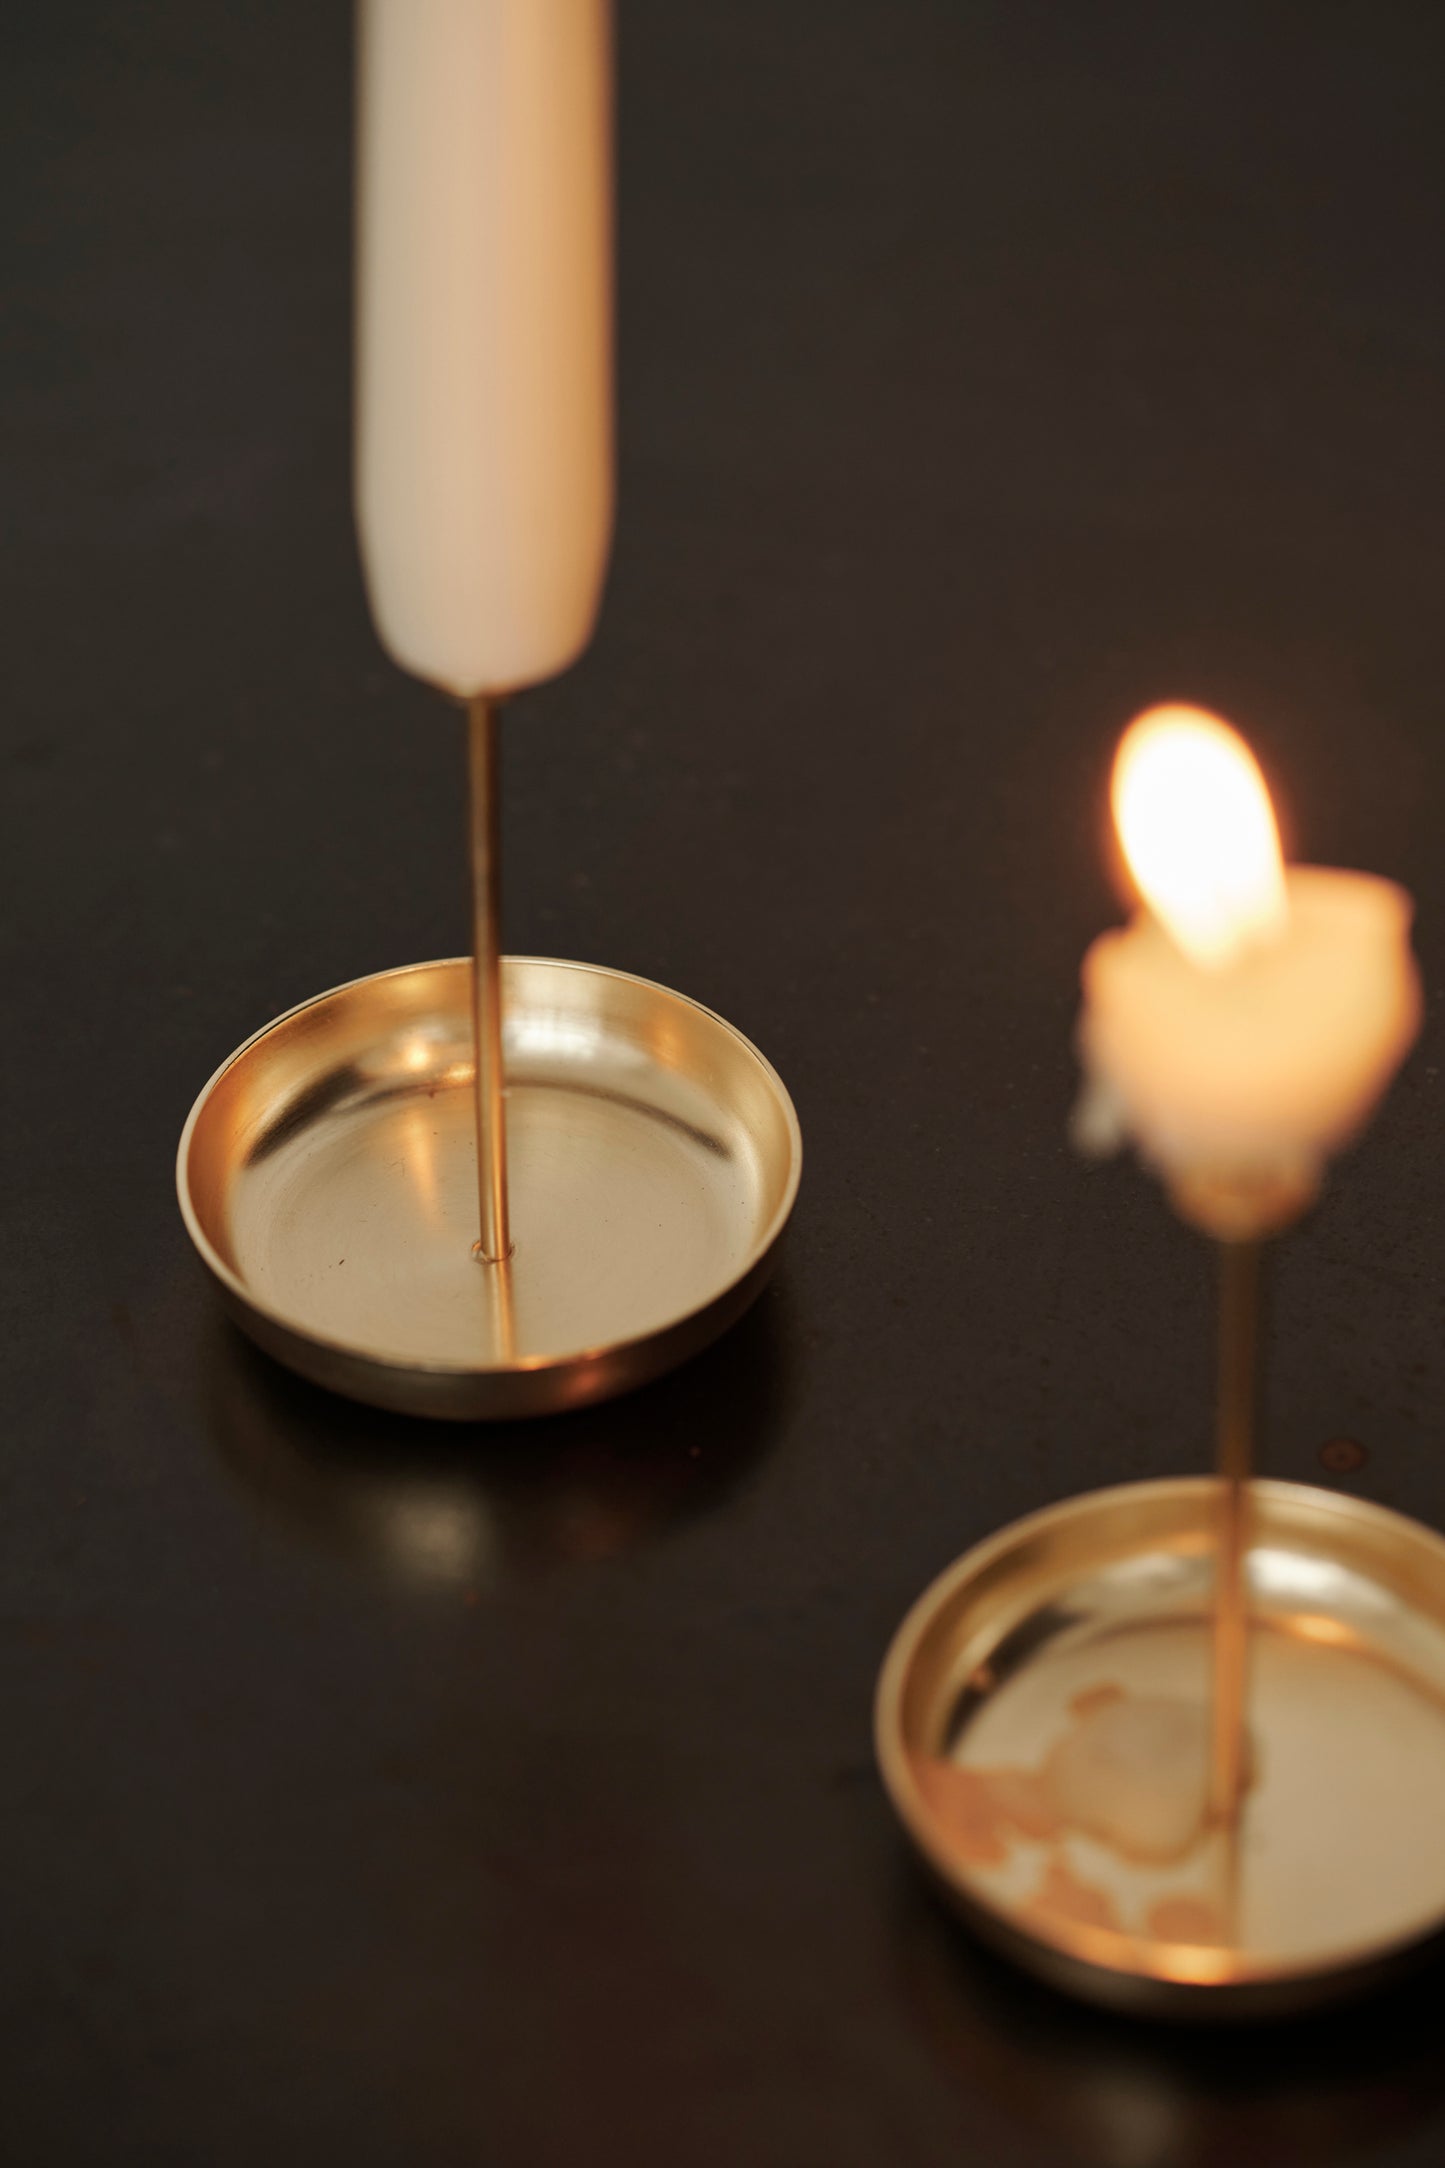 Close-up of the micro candle pin brass, showcasing its intricate design and brass finish. Adds a refined and decorative element to candle displays.